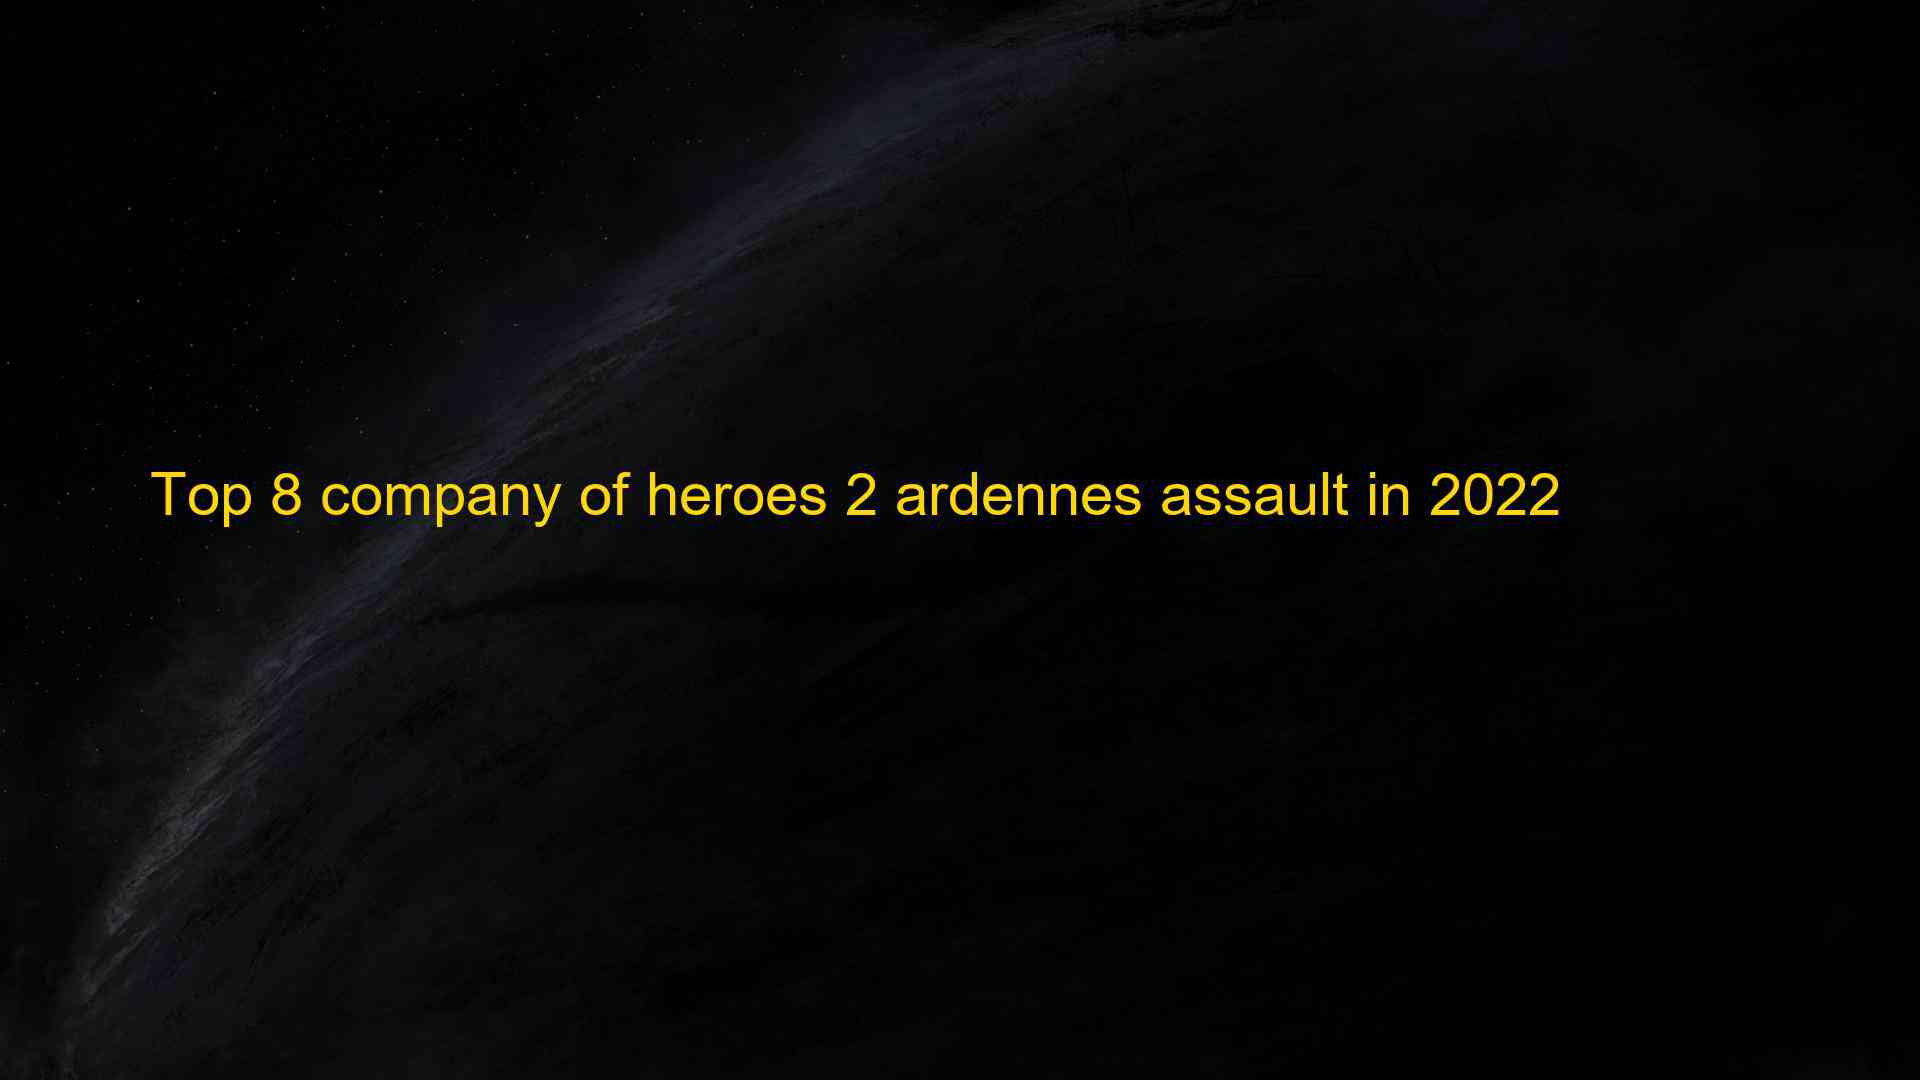 Top 8 company of heroes 2 ardennes assault in 2022 1660014192